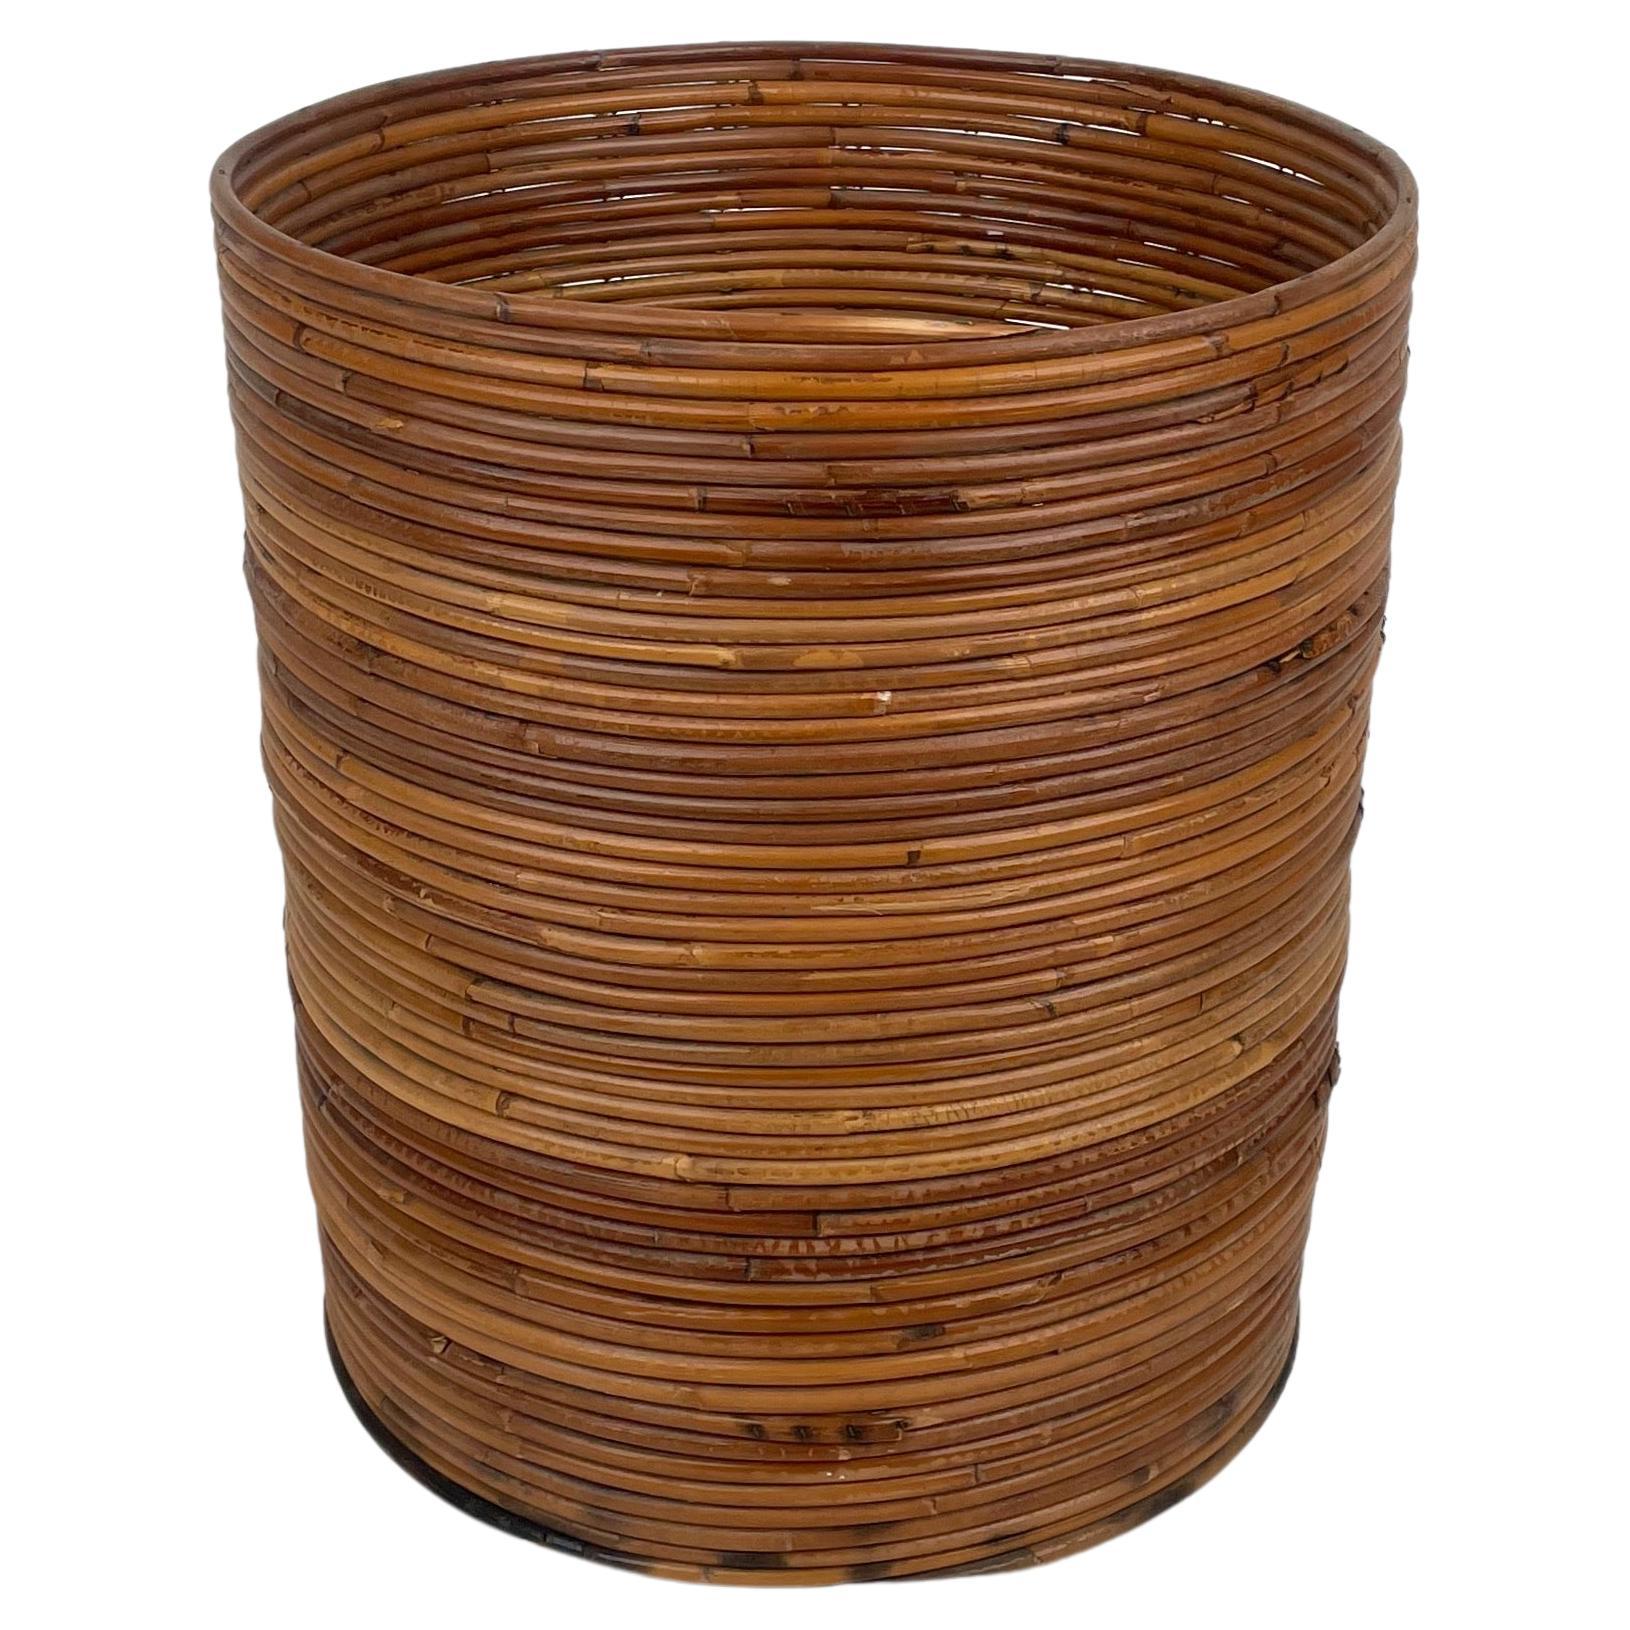 Rattan and Bamboo Round Basket Plant Holder Vase, Italy, 1960s For Sale